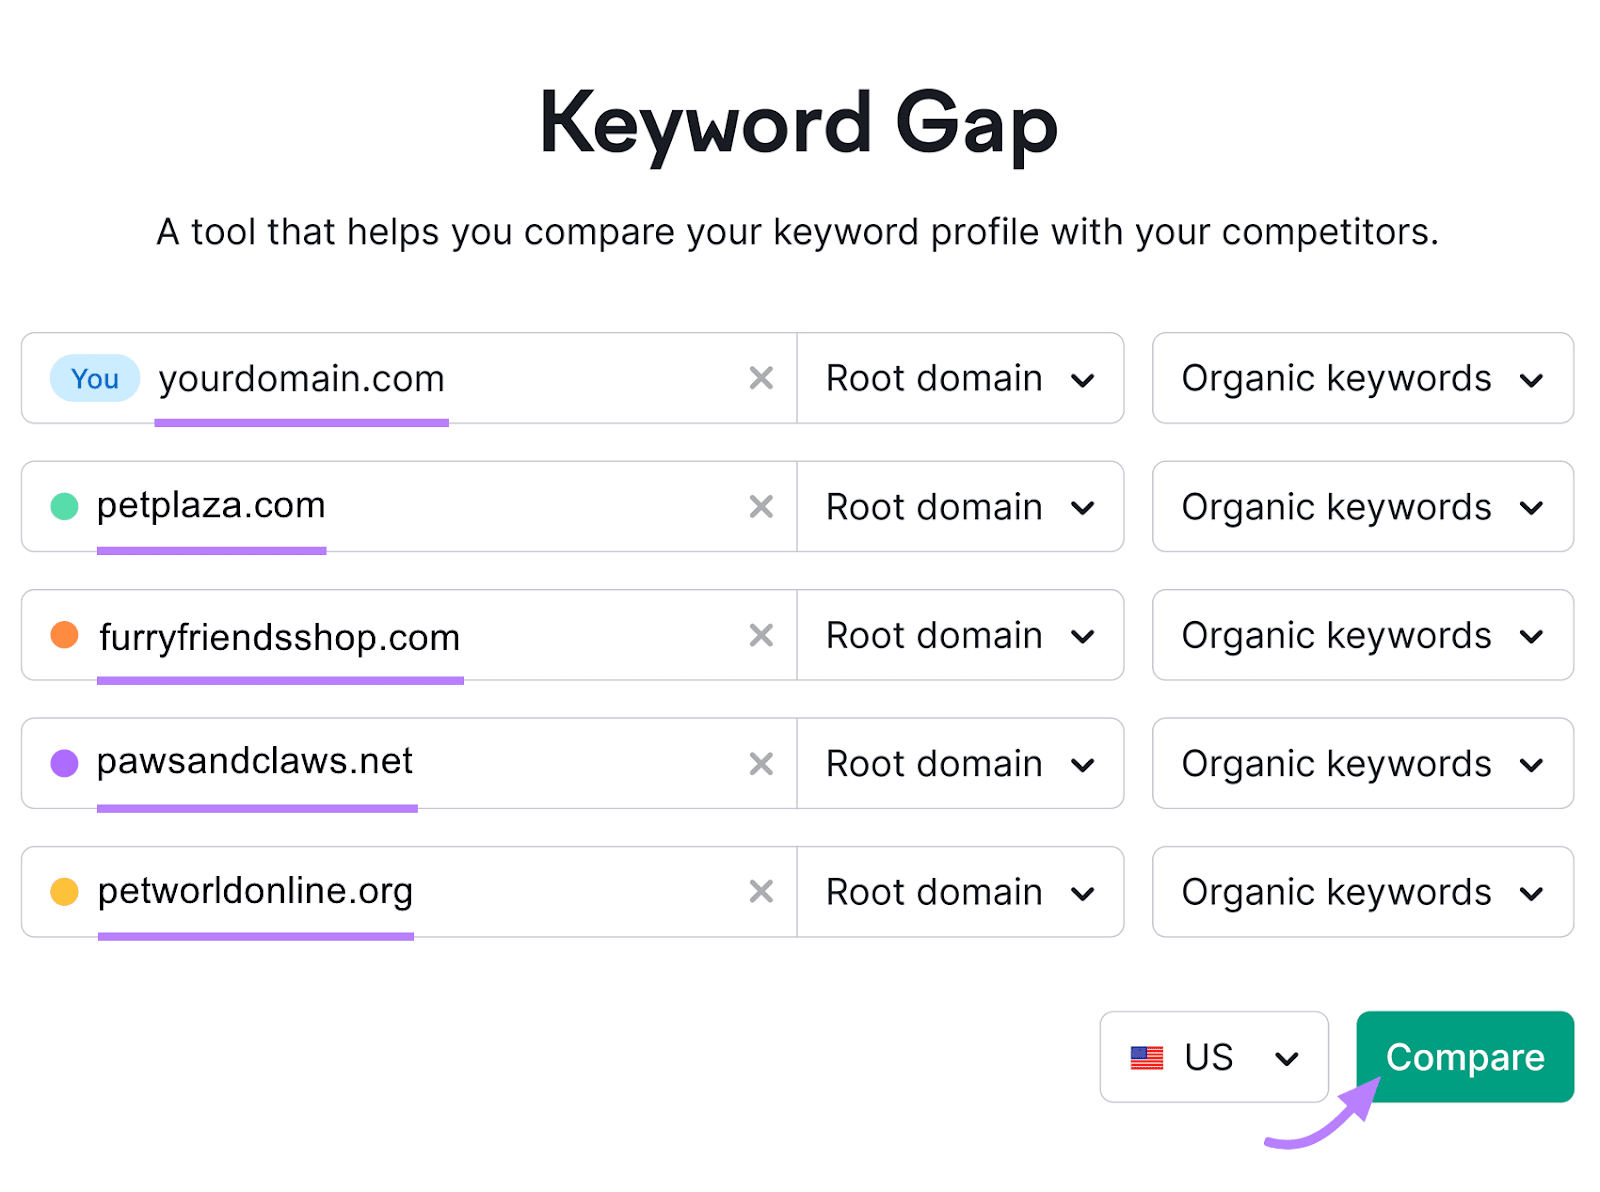 Keyword Gap tool search bar showing five websites with dropdown selections and a "Compare" button highlighted in purple.